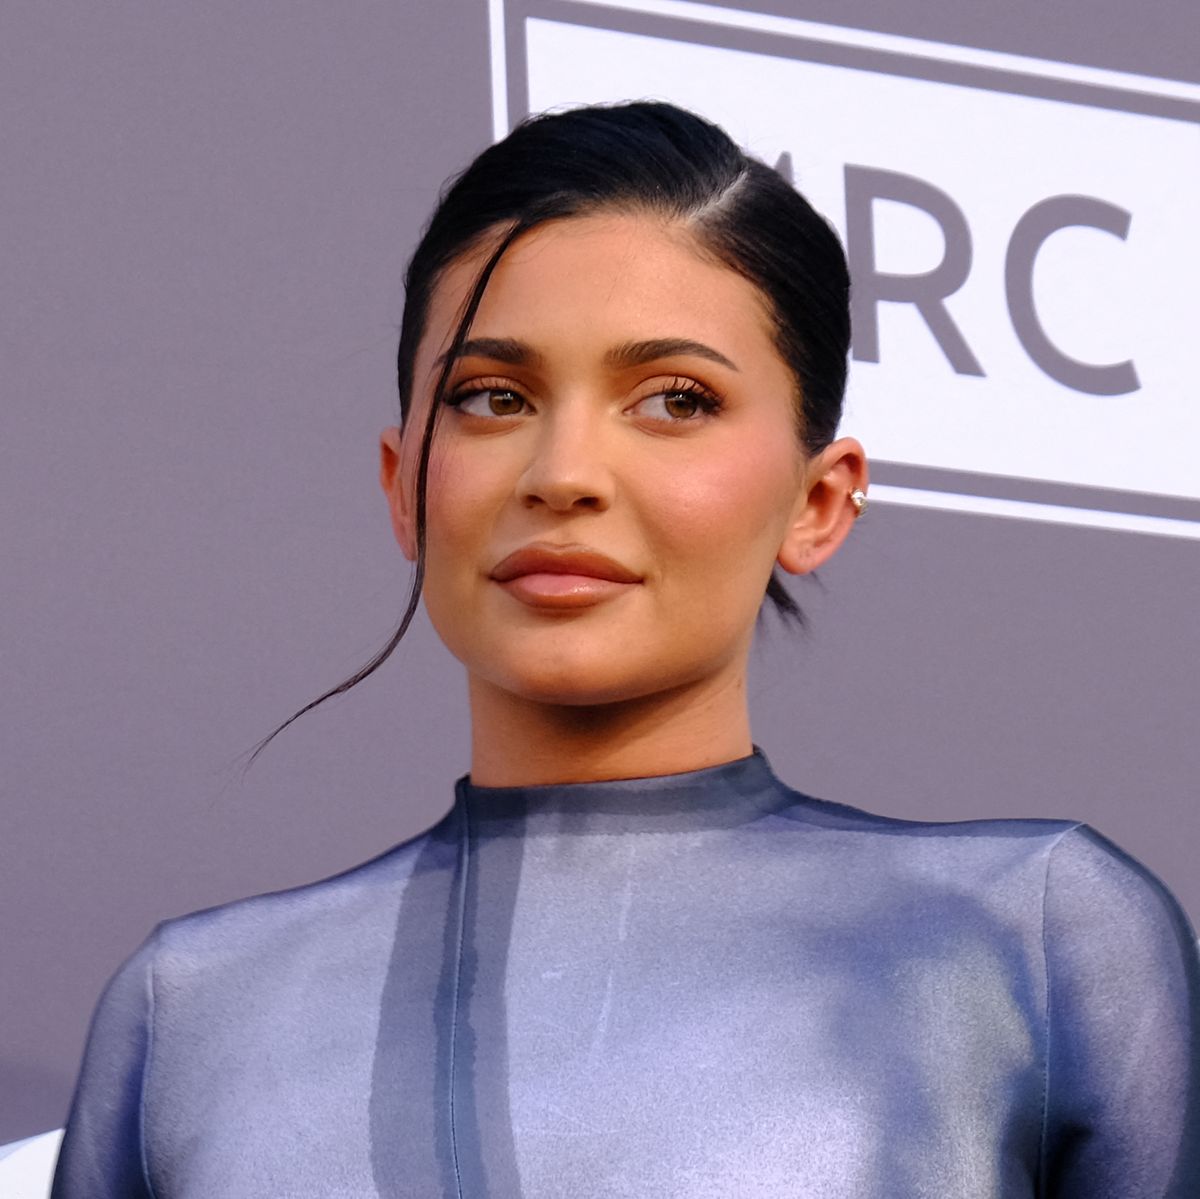 Kylie Jenner responds to criticism over her latest Instagram post